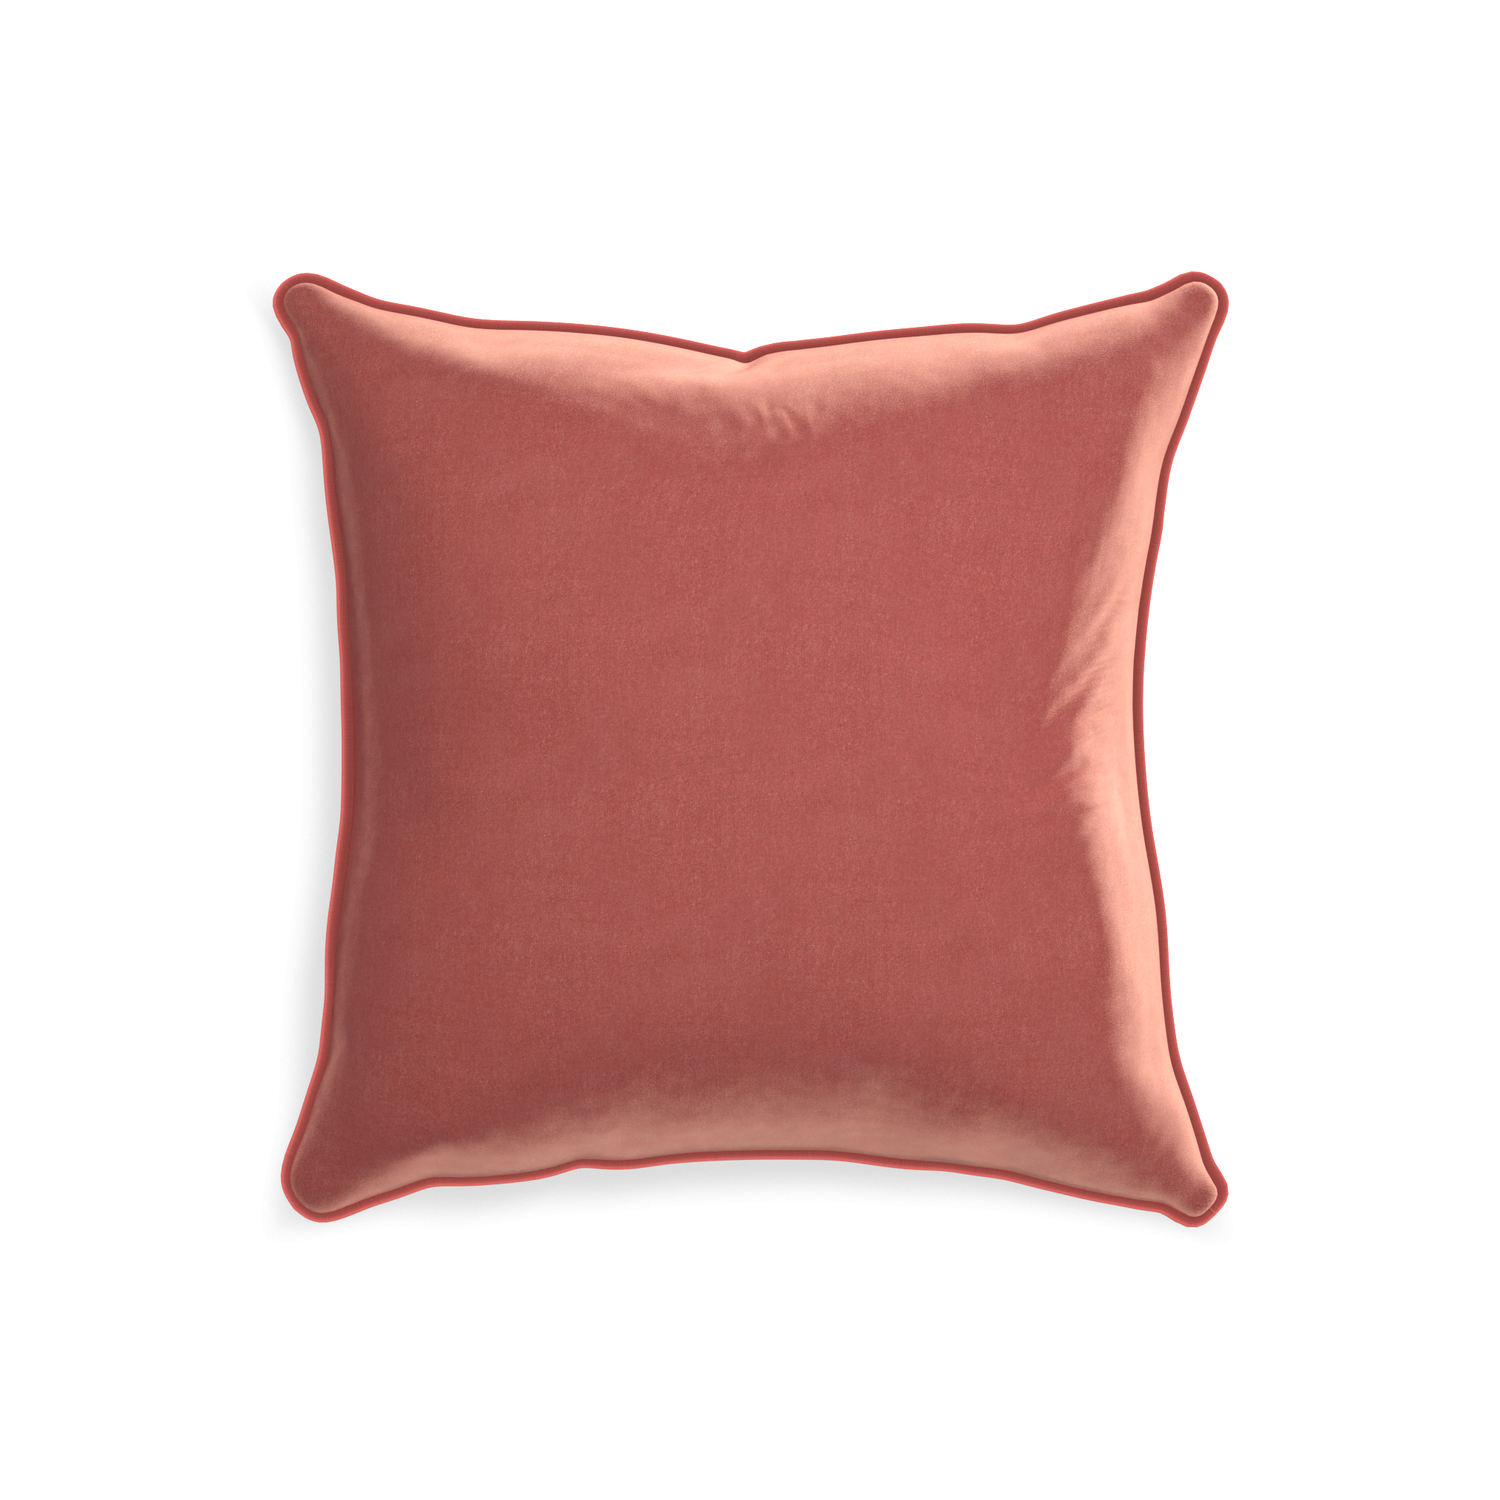 20-square cosmo velvet custom pillow with c piping on white background